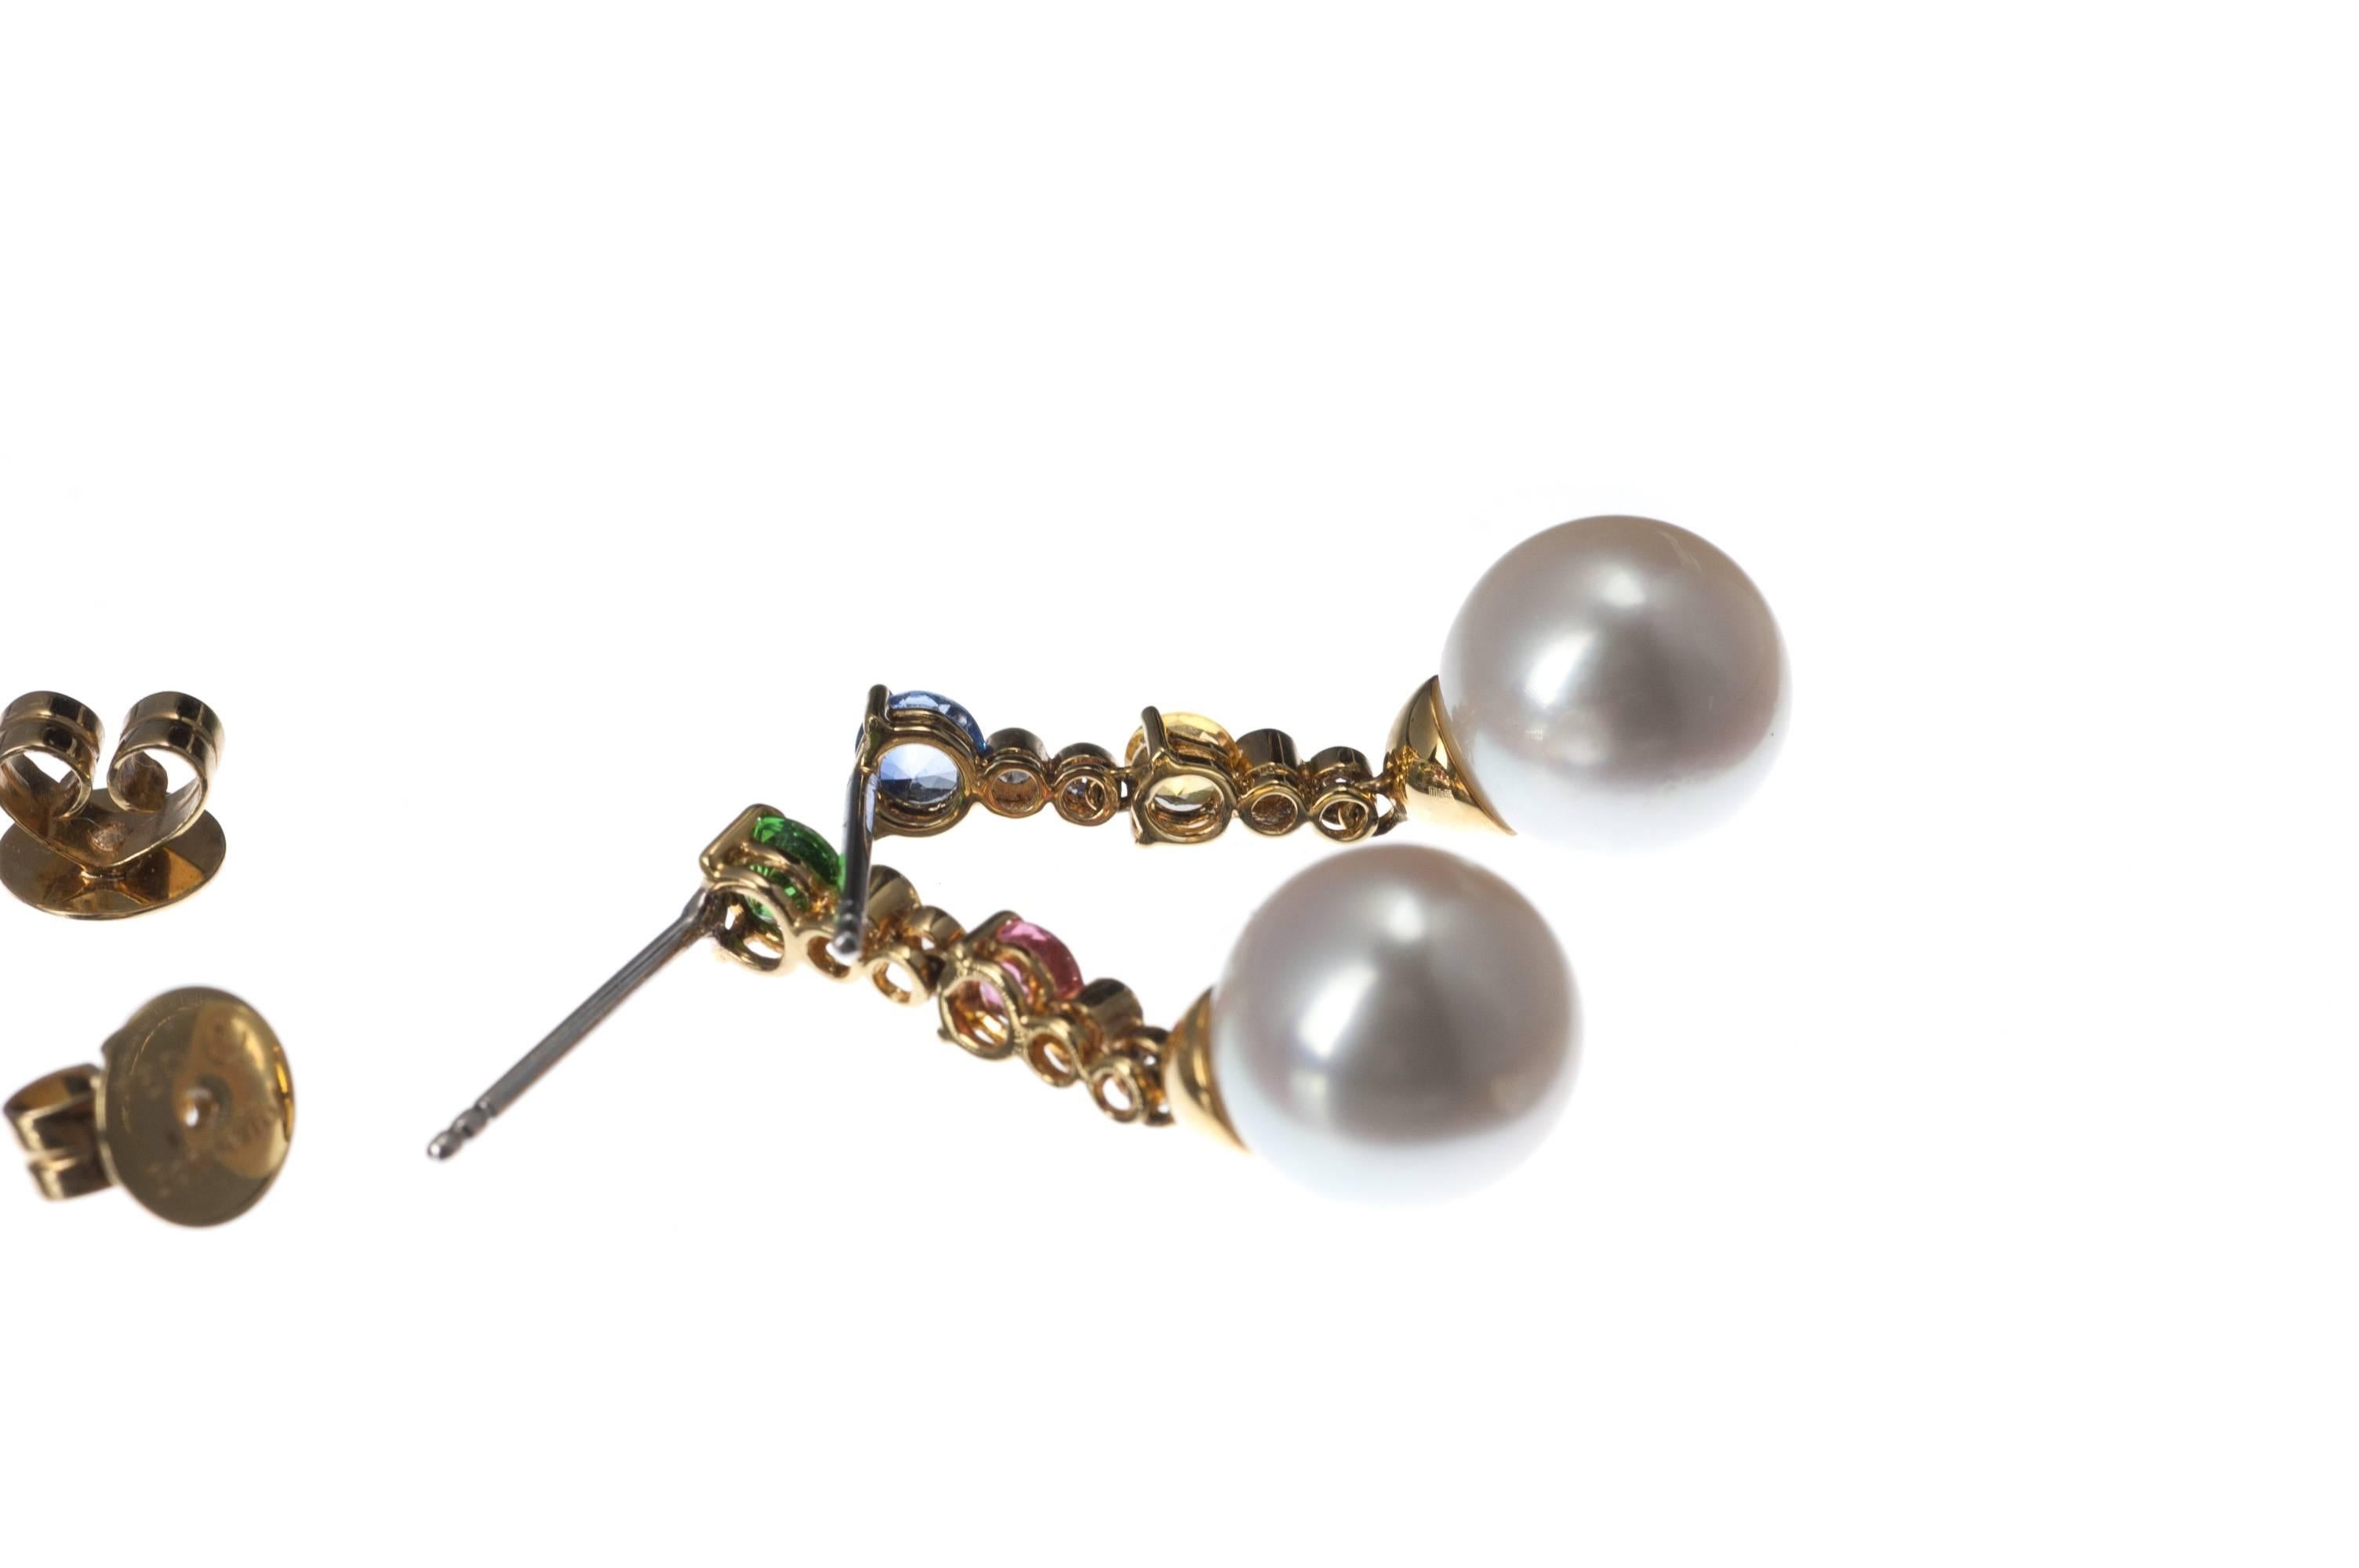 Schoeffel Pearl, Sapphire, Diamond and Tsavorite Drop Earrings in 18 Karat Yello In Excellent Condition For Sale In Saint Louis, MO